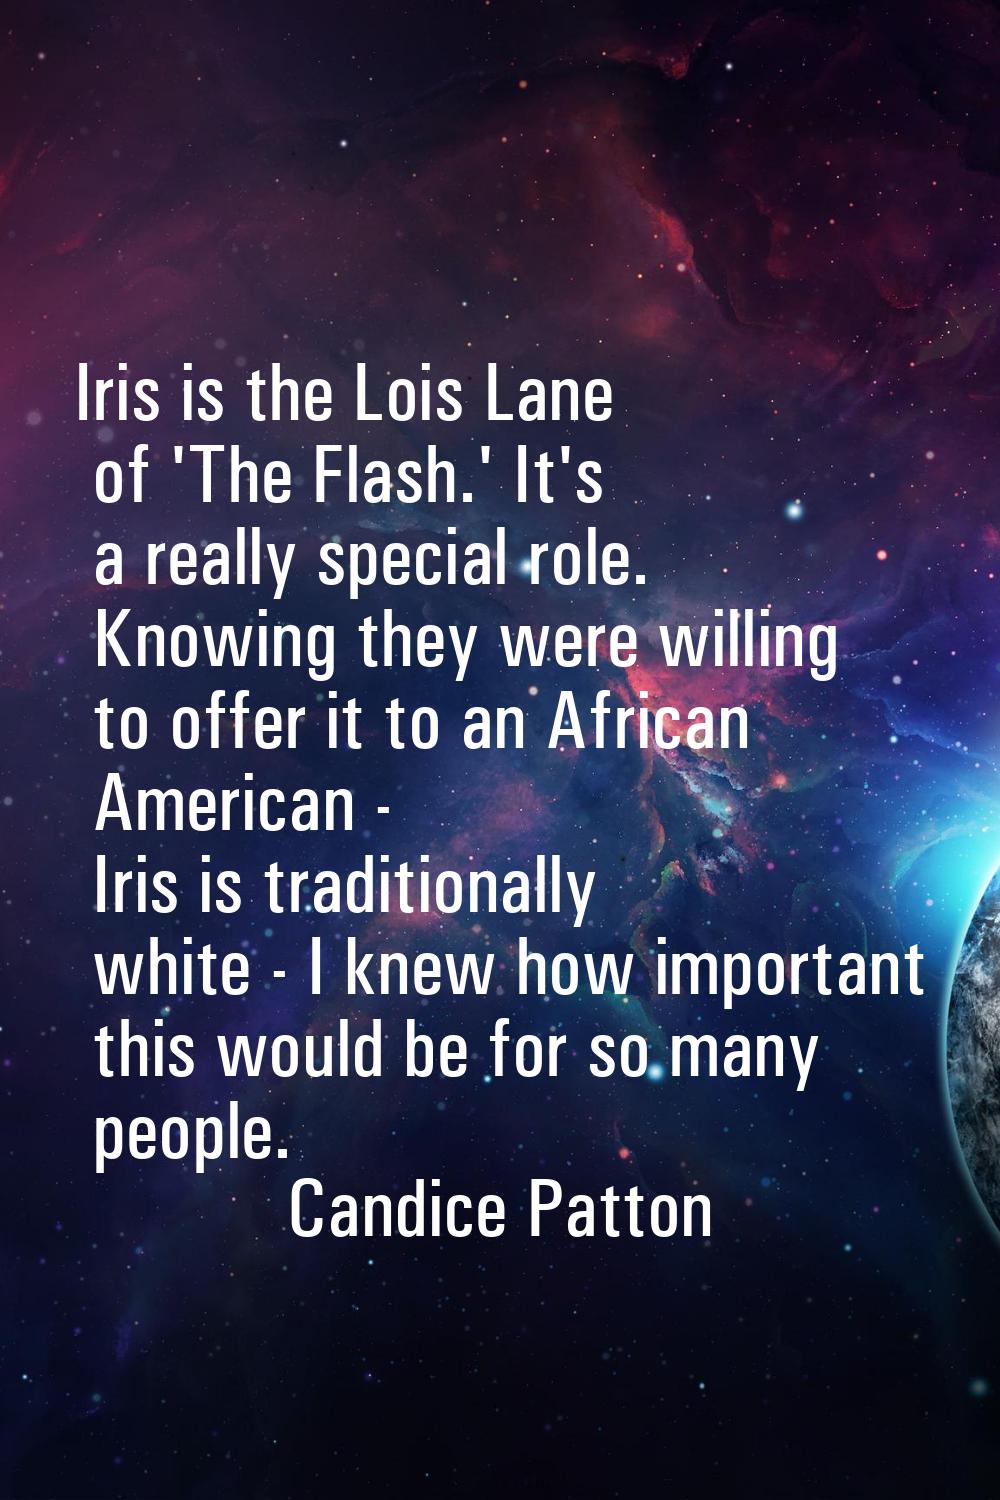 Iris is the Lois Lane of 'The Flash.' It's a really special role. Knowing they were willing to offe